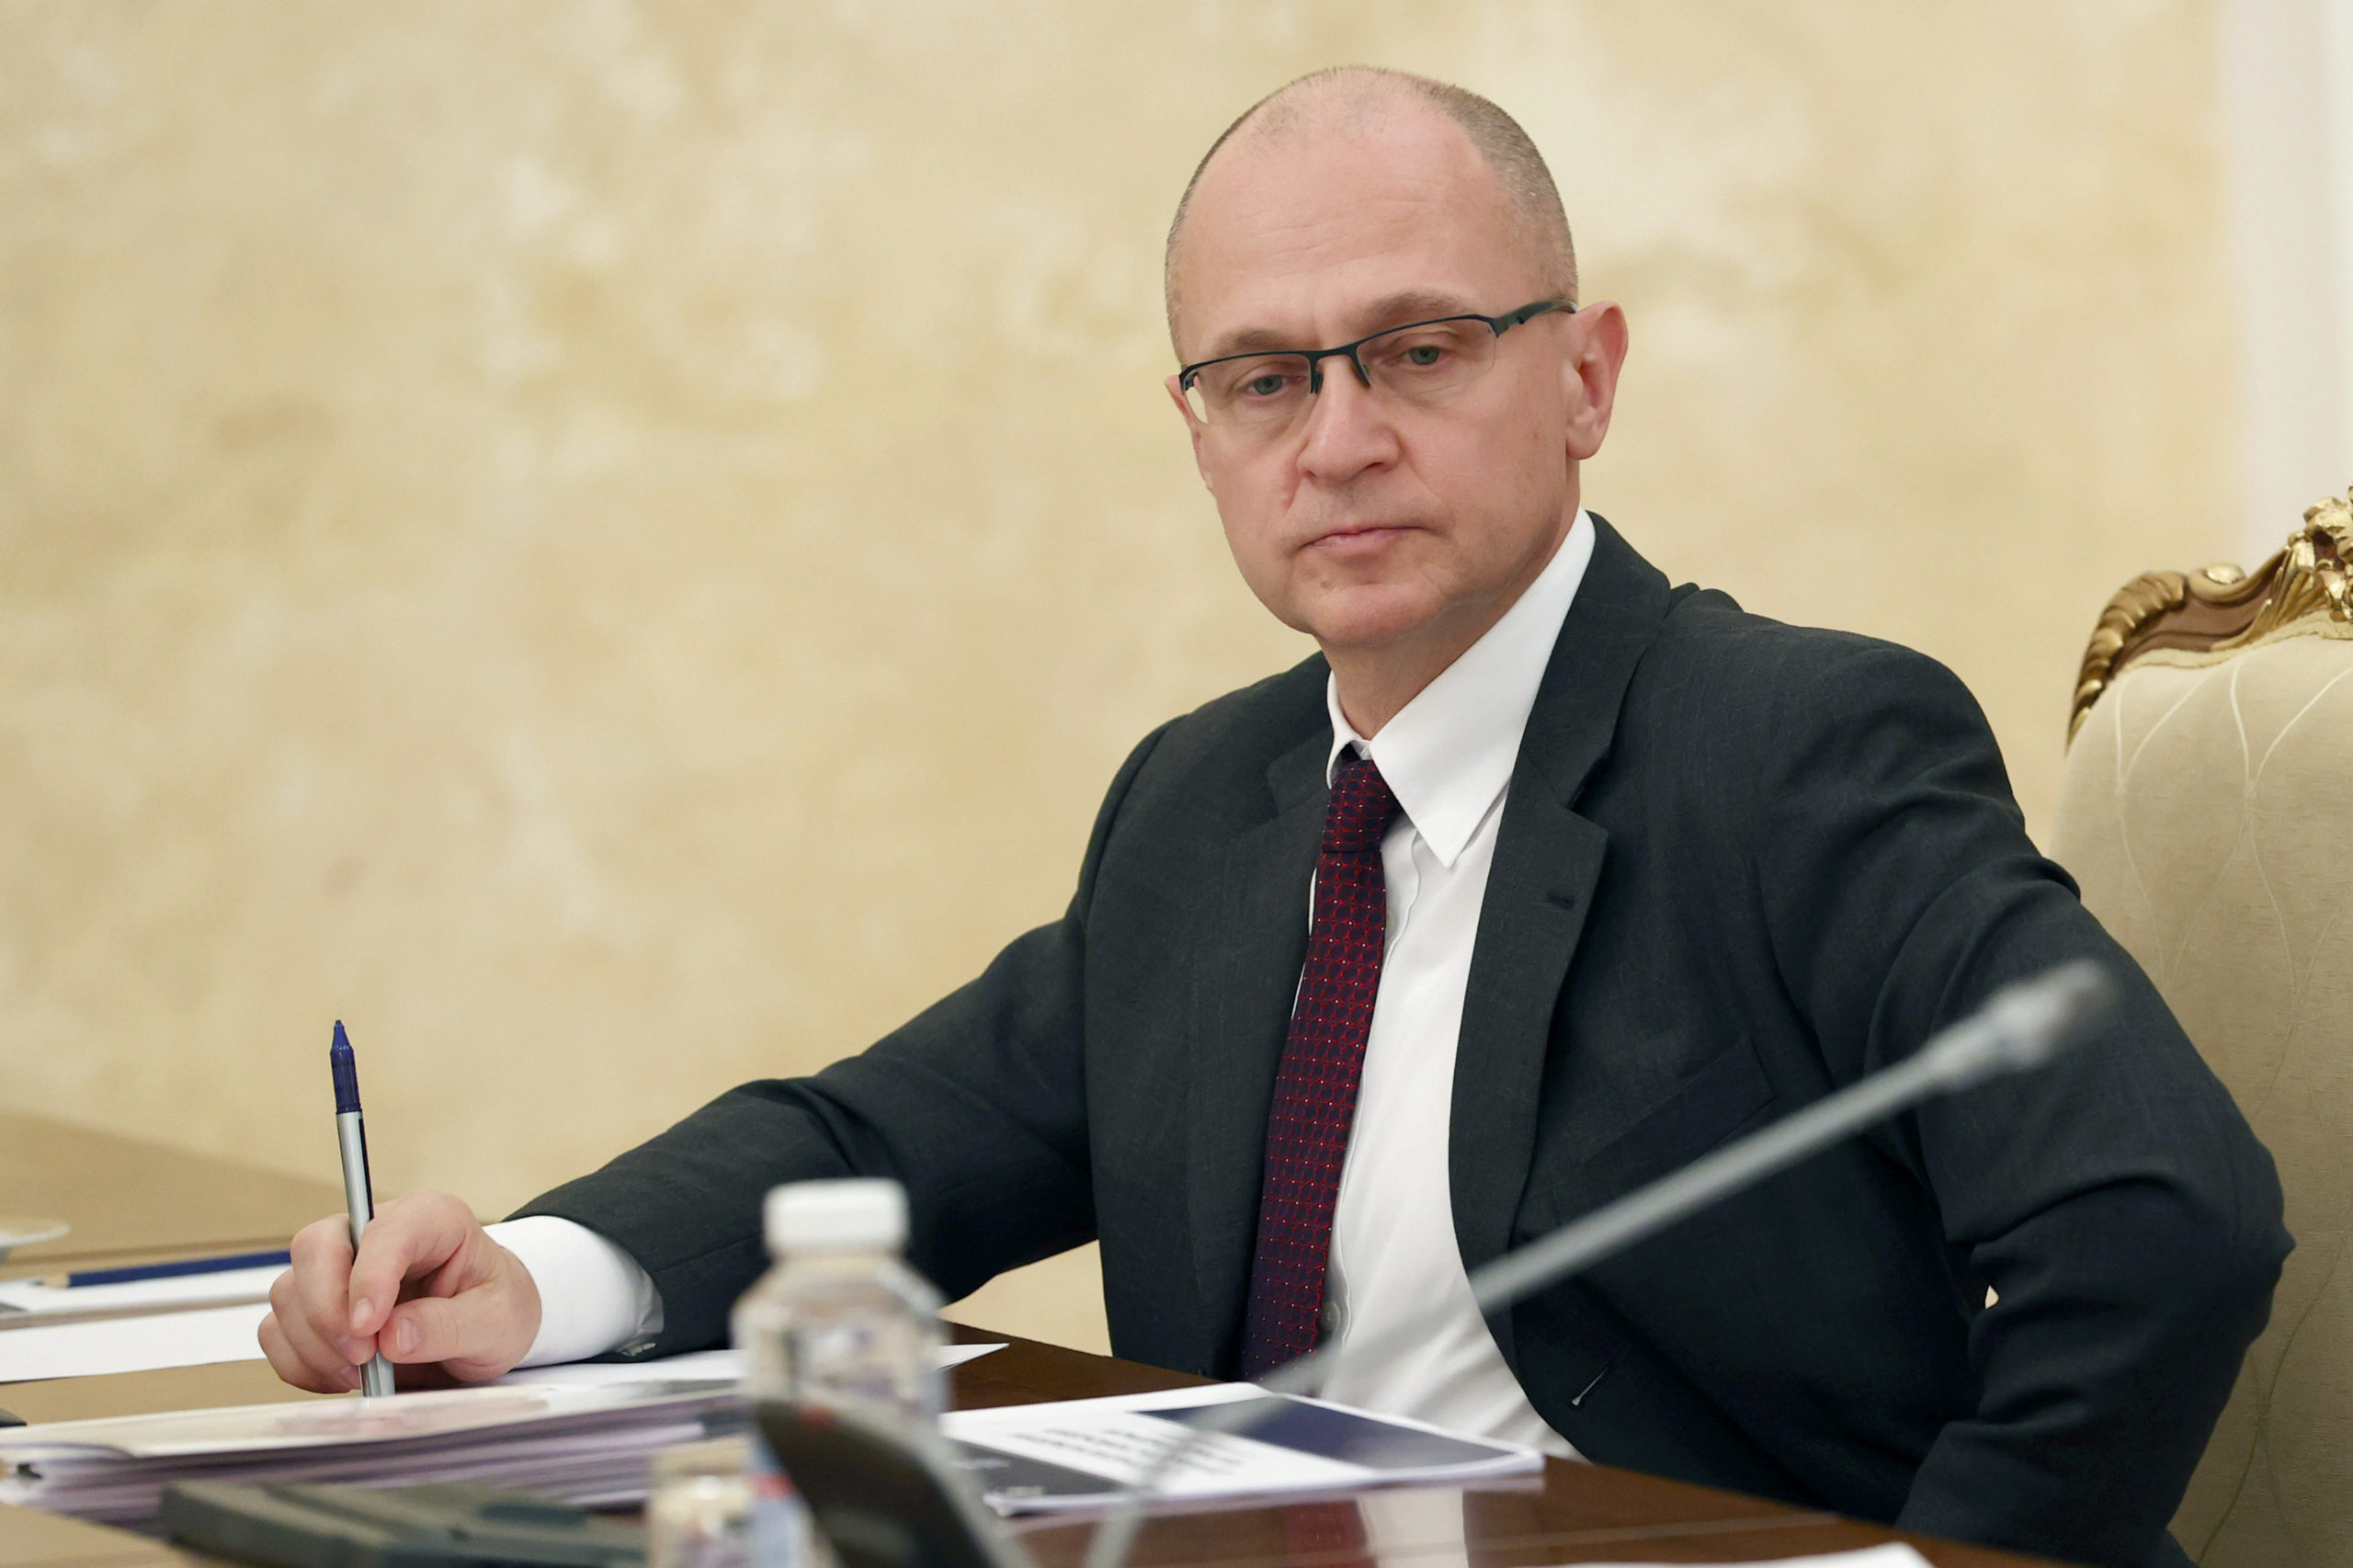 Since 2016, Sergei Kiriyenko has served as Deputy Chief of Staff of the Russian Presidential Administration, the agency that coordinates President Putin's administration.